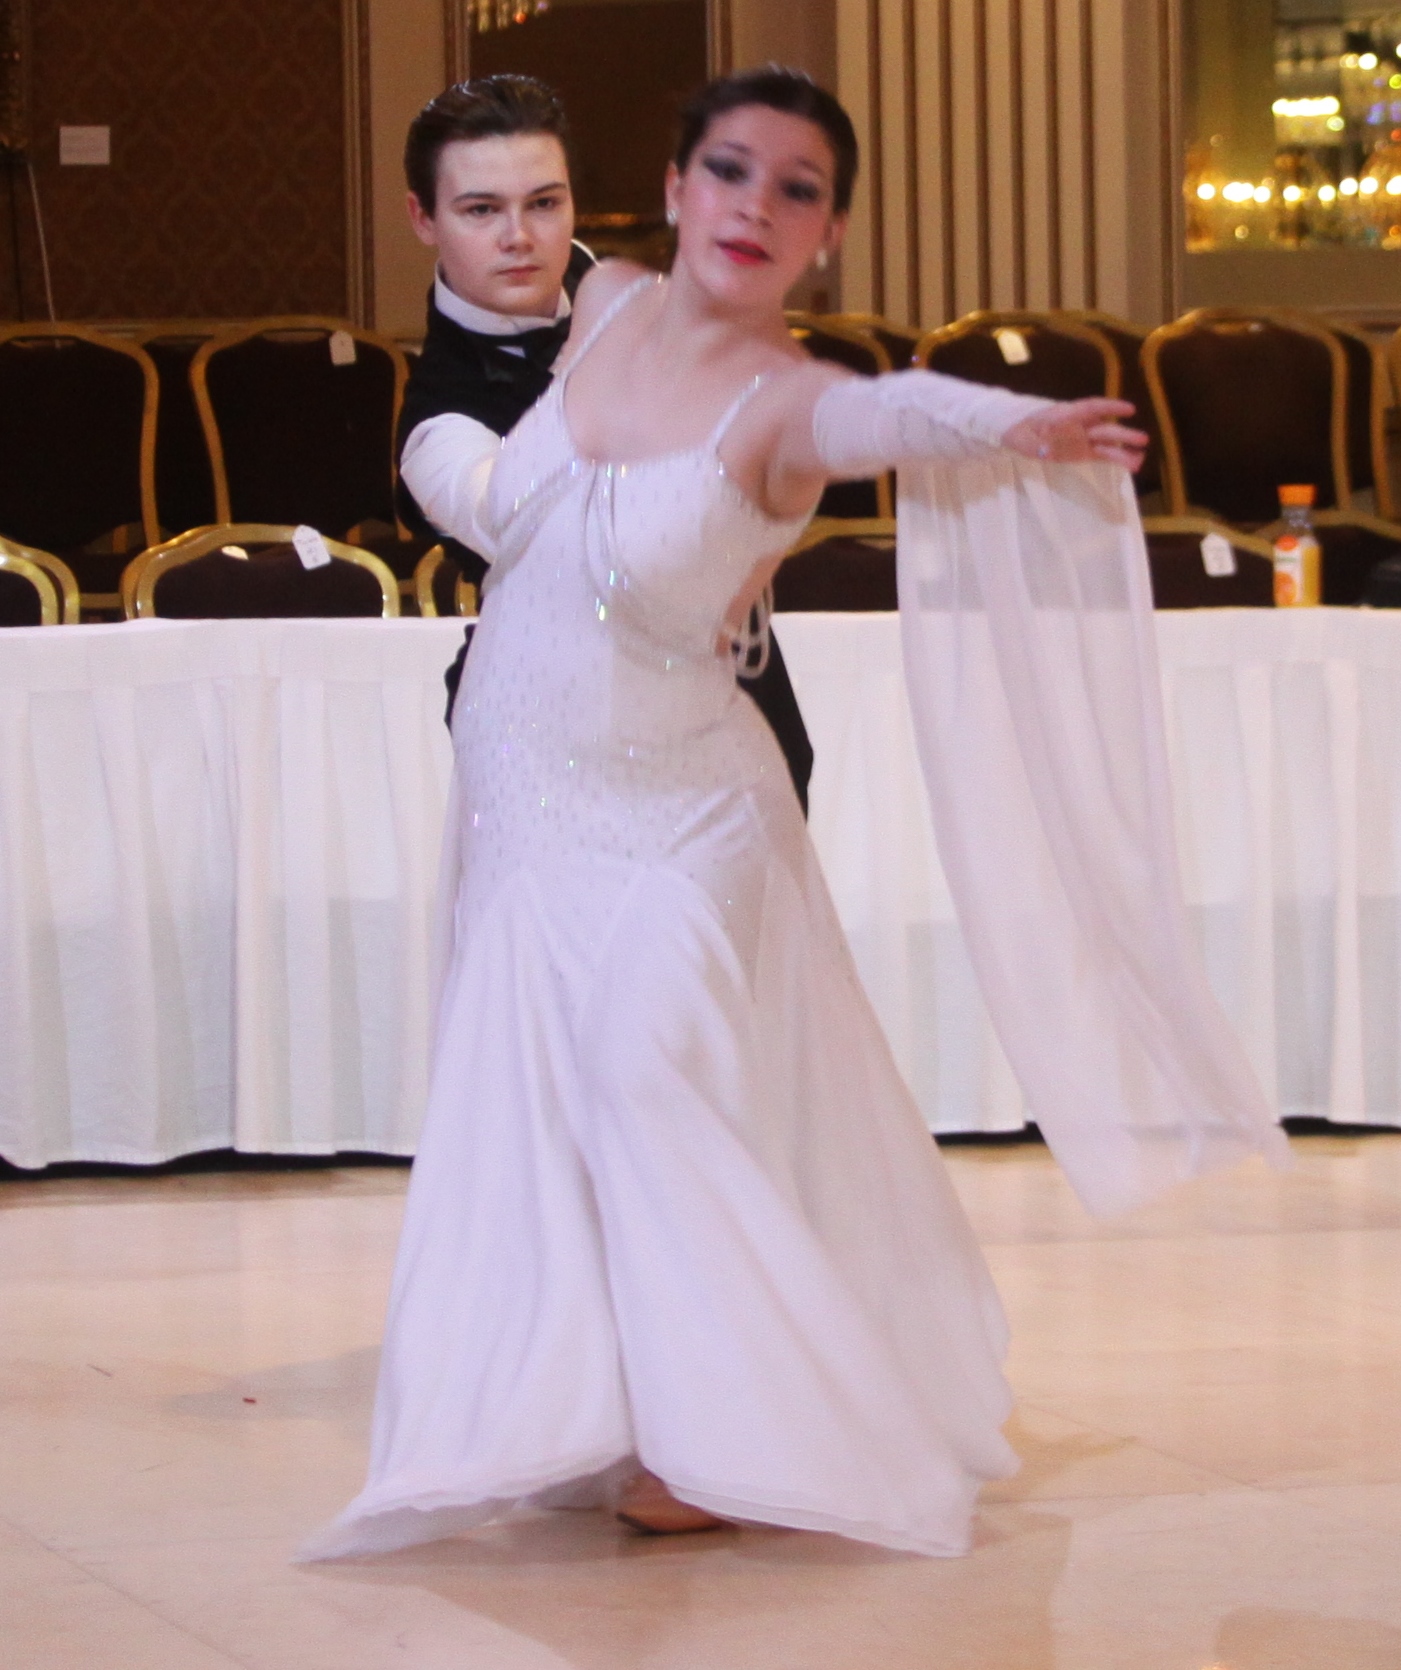 Wisconsin Youth Wins at State Ballroom Dance Competitions | United ...